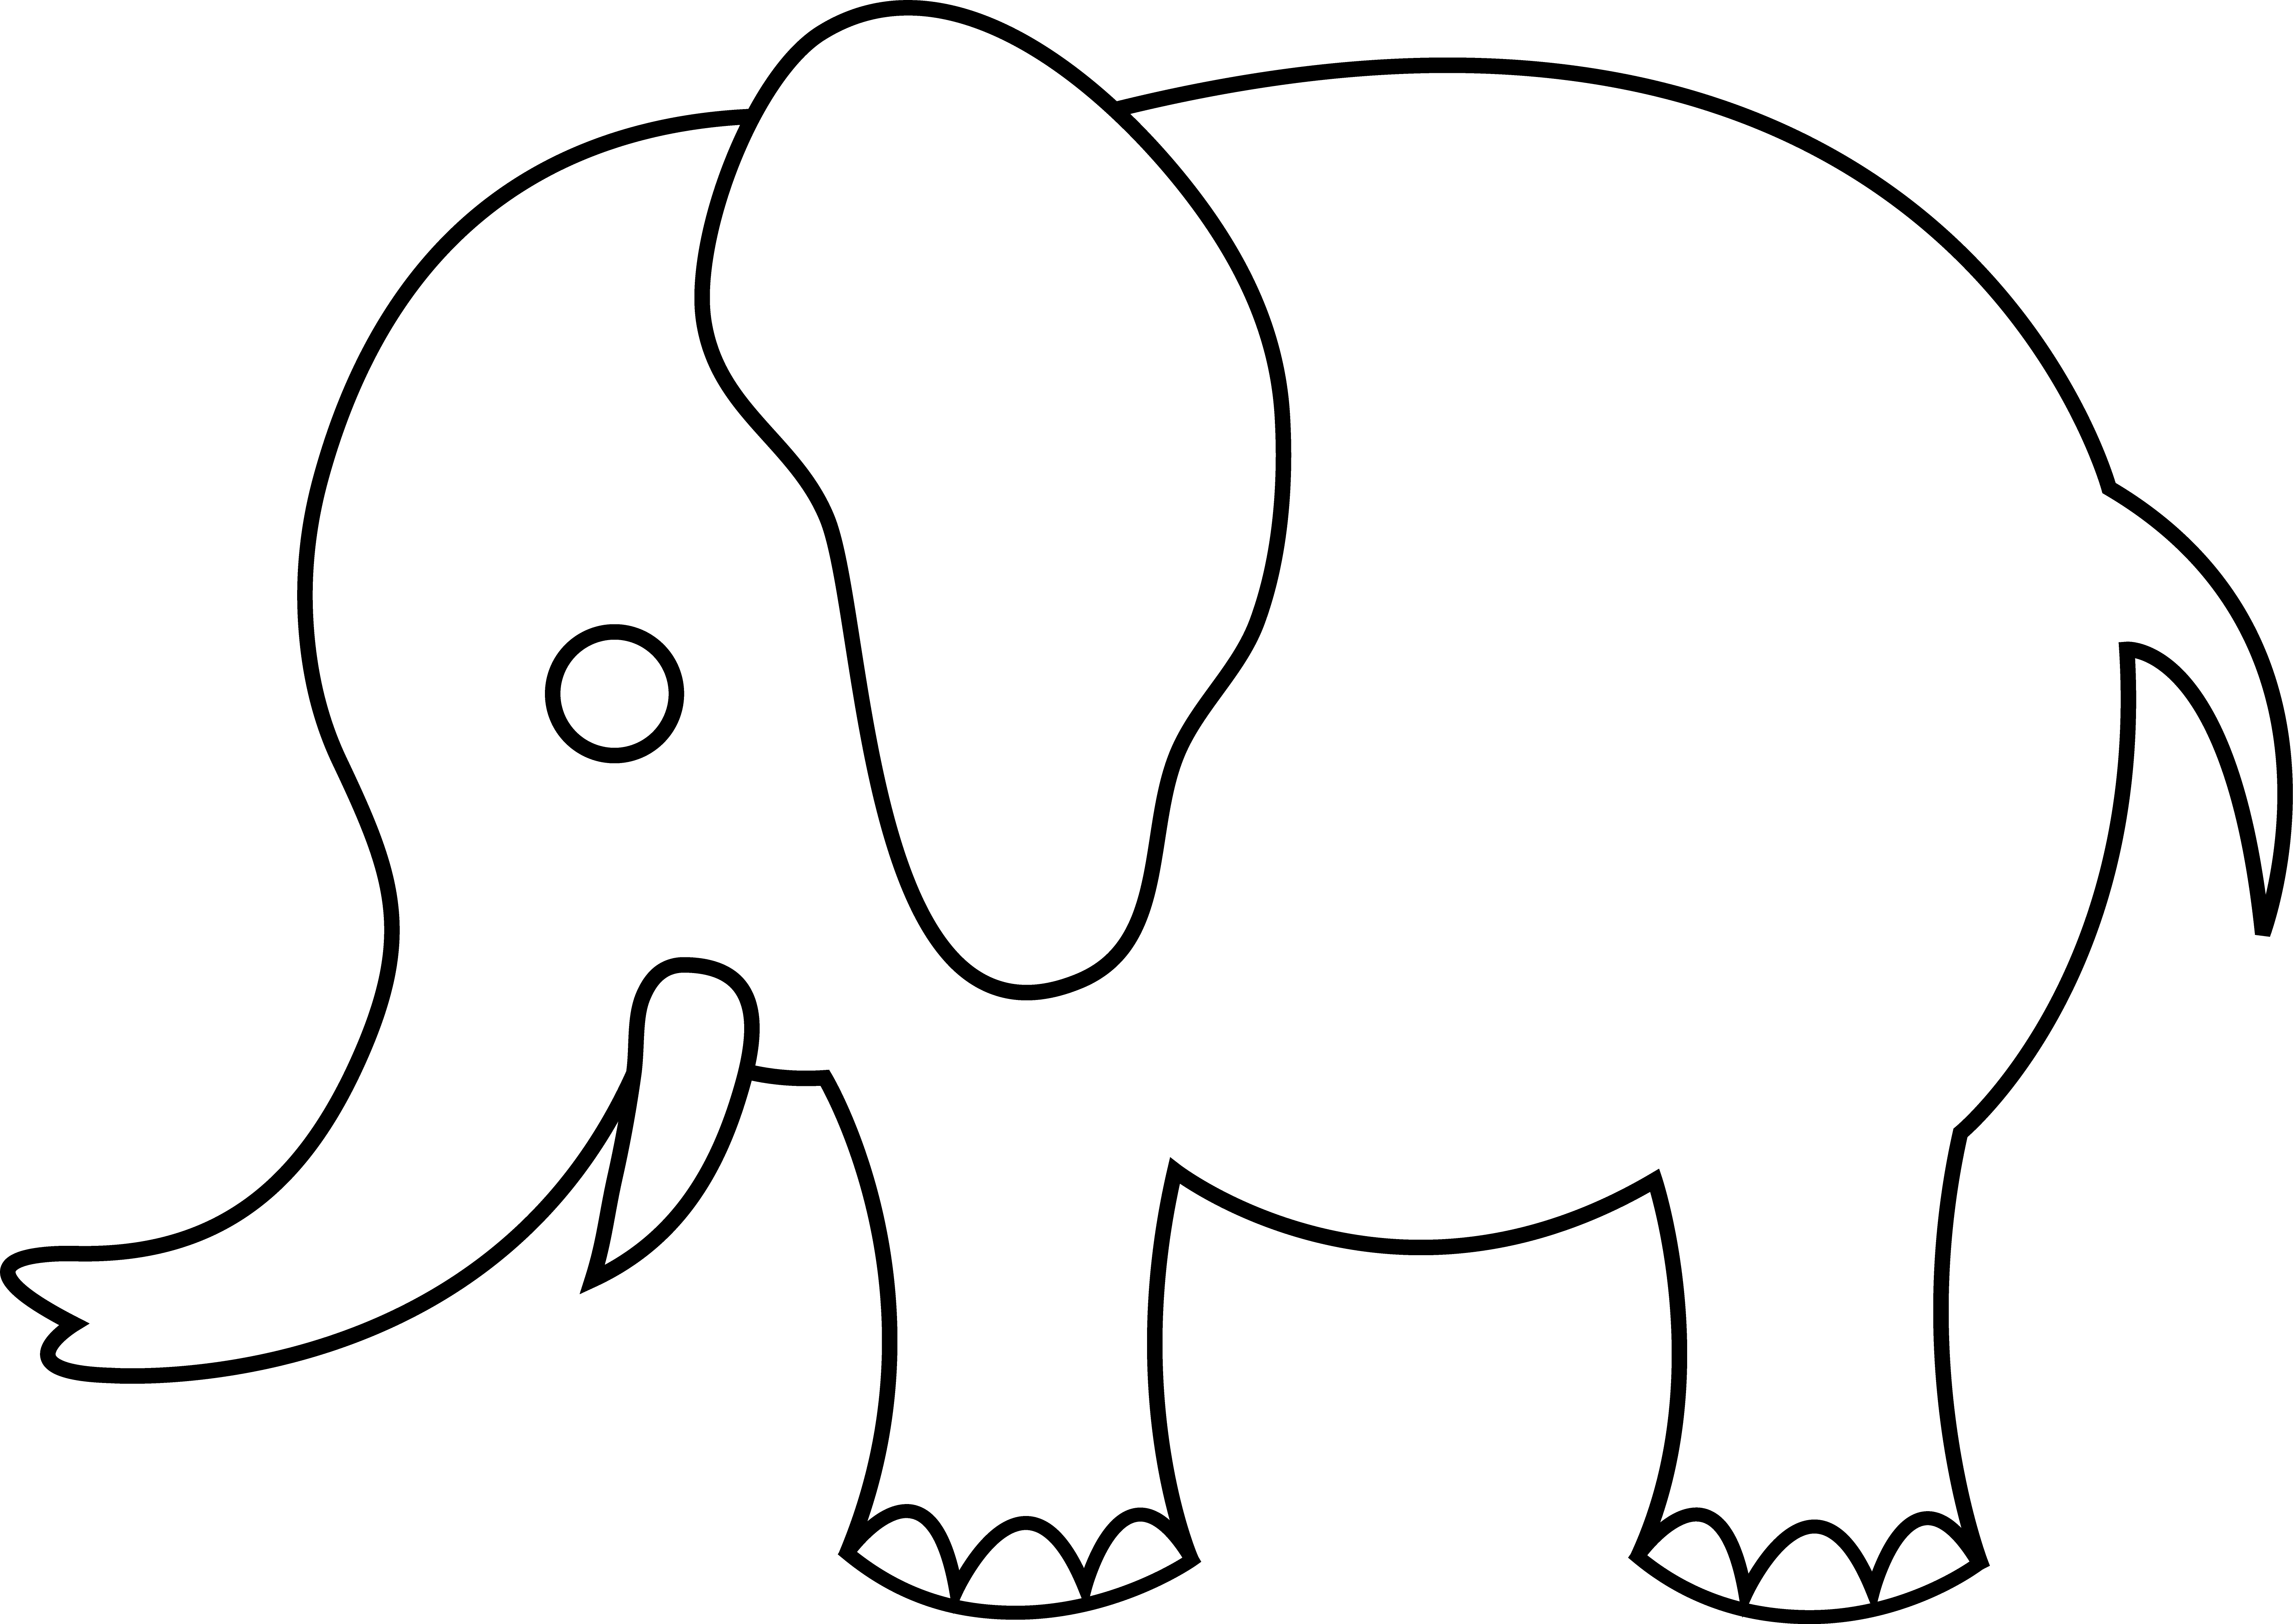 Elephant Clipart Black And White | Clipart Panda - Free Clipart Images